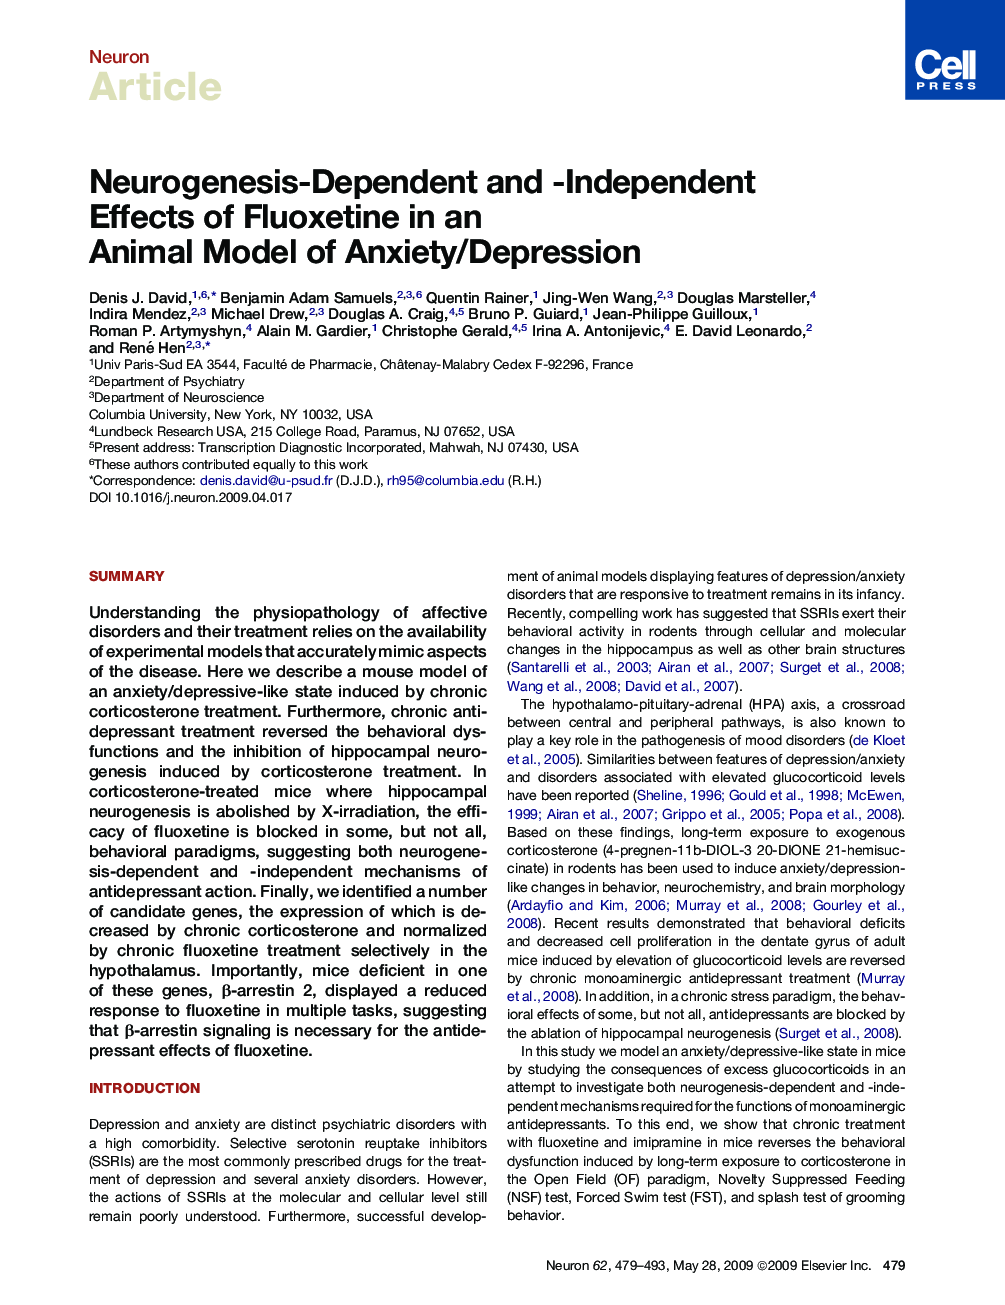 Neurogenesis-Dependent and -Independent Effects of Fluoxetine in an Animal Model of Anxiety/Depression